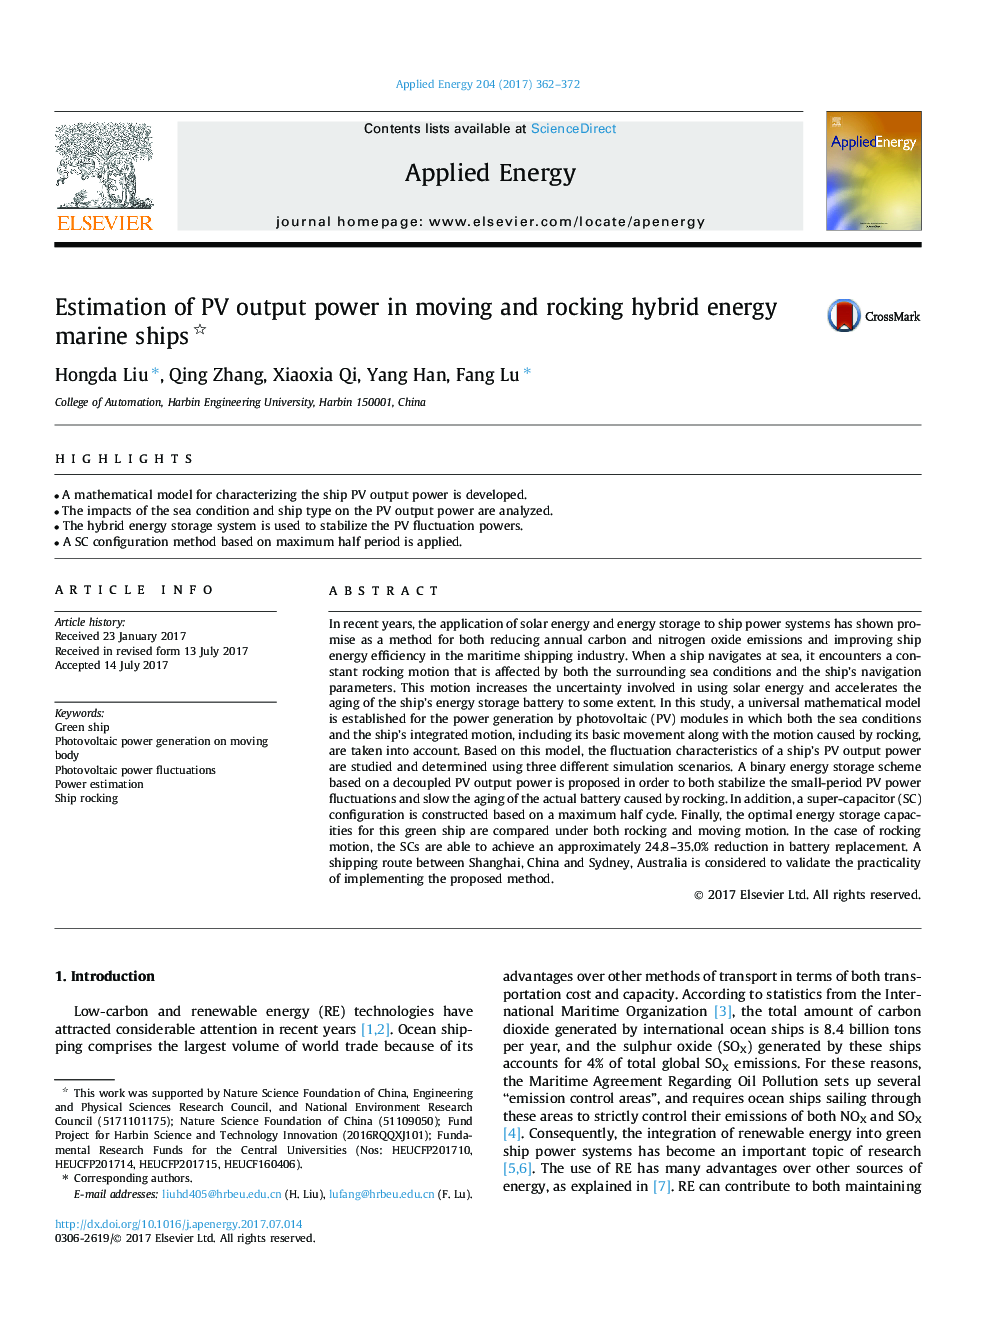 Estimation of PV output power in moving and rocking hybrid energy marine ships